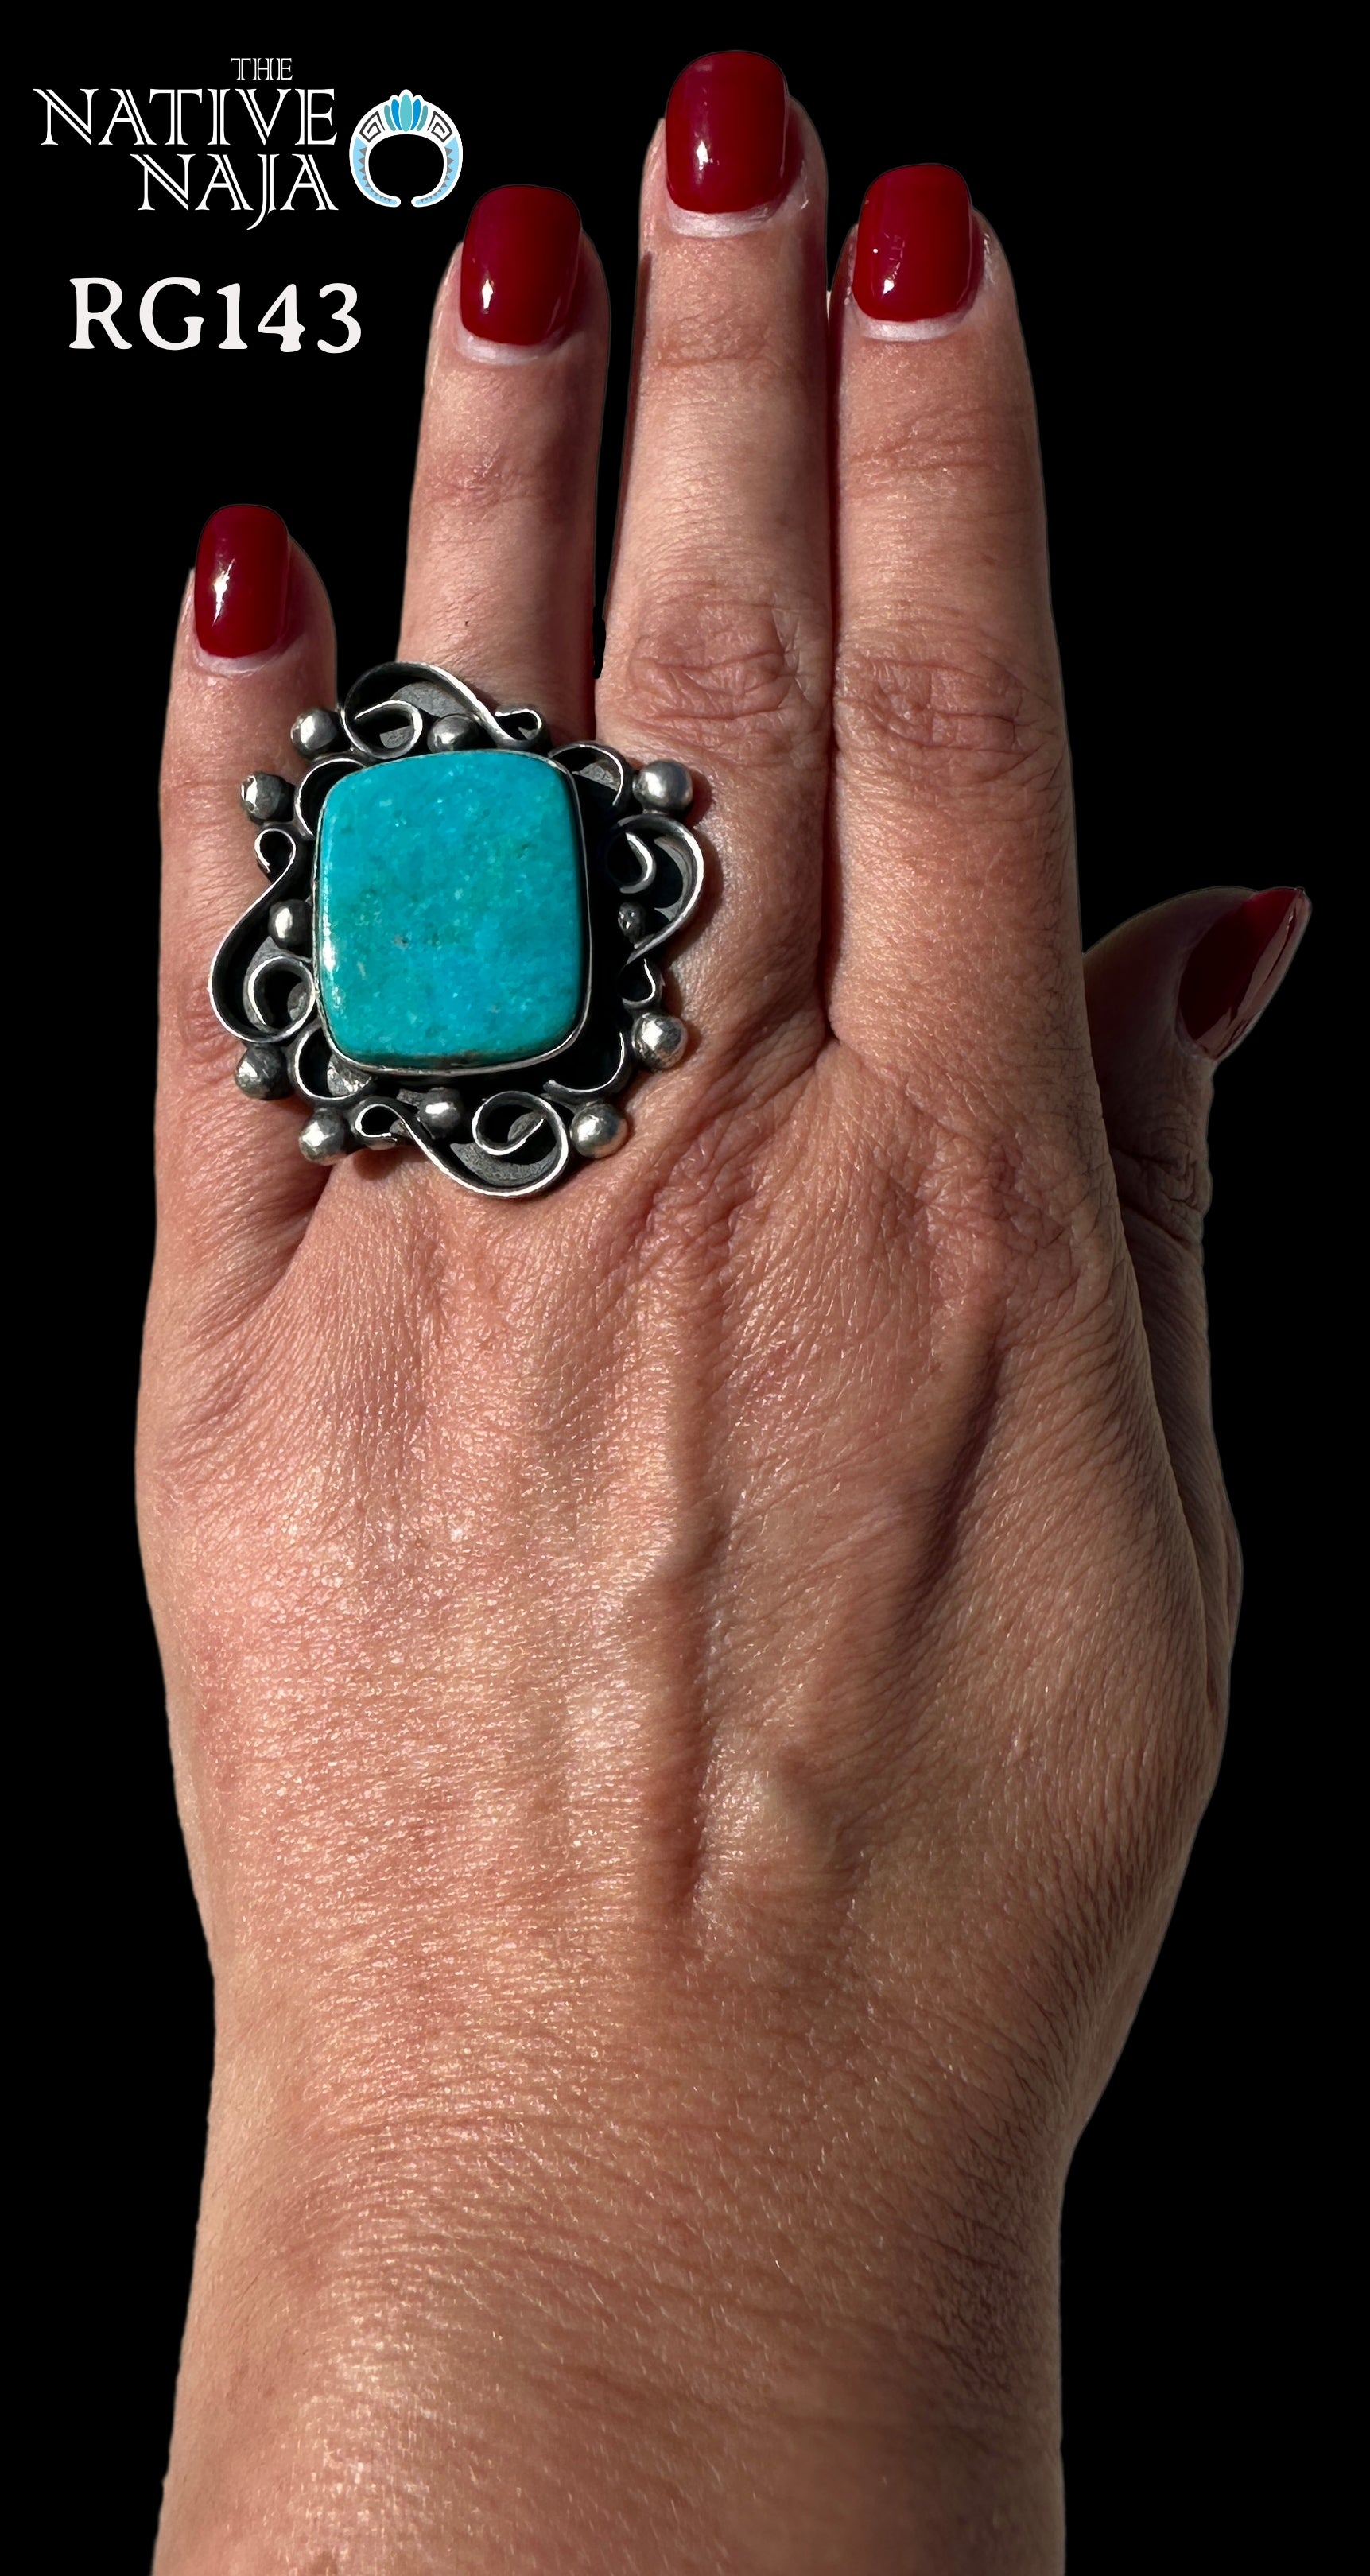 Chimney Butte Silver & Campitos Turquoise Stunning Statement Ring Size 7 RG143